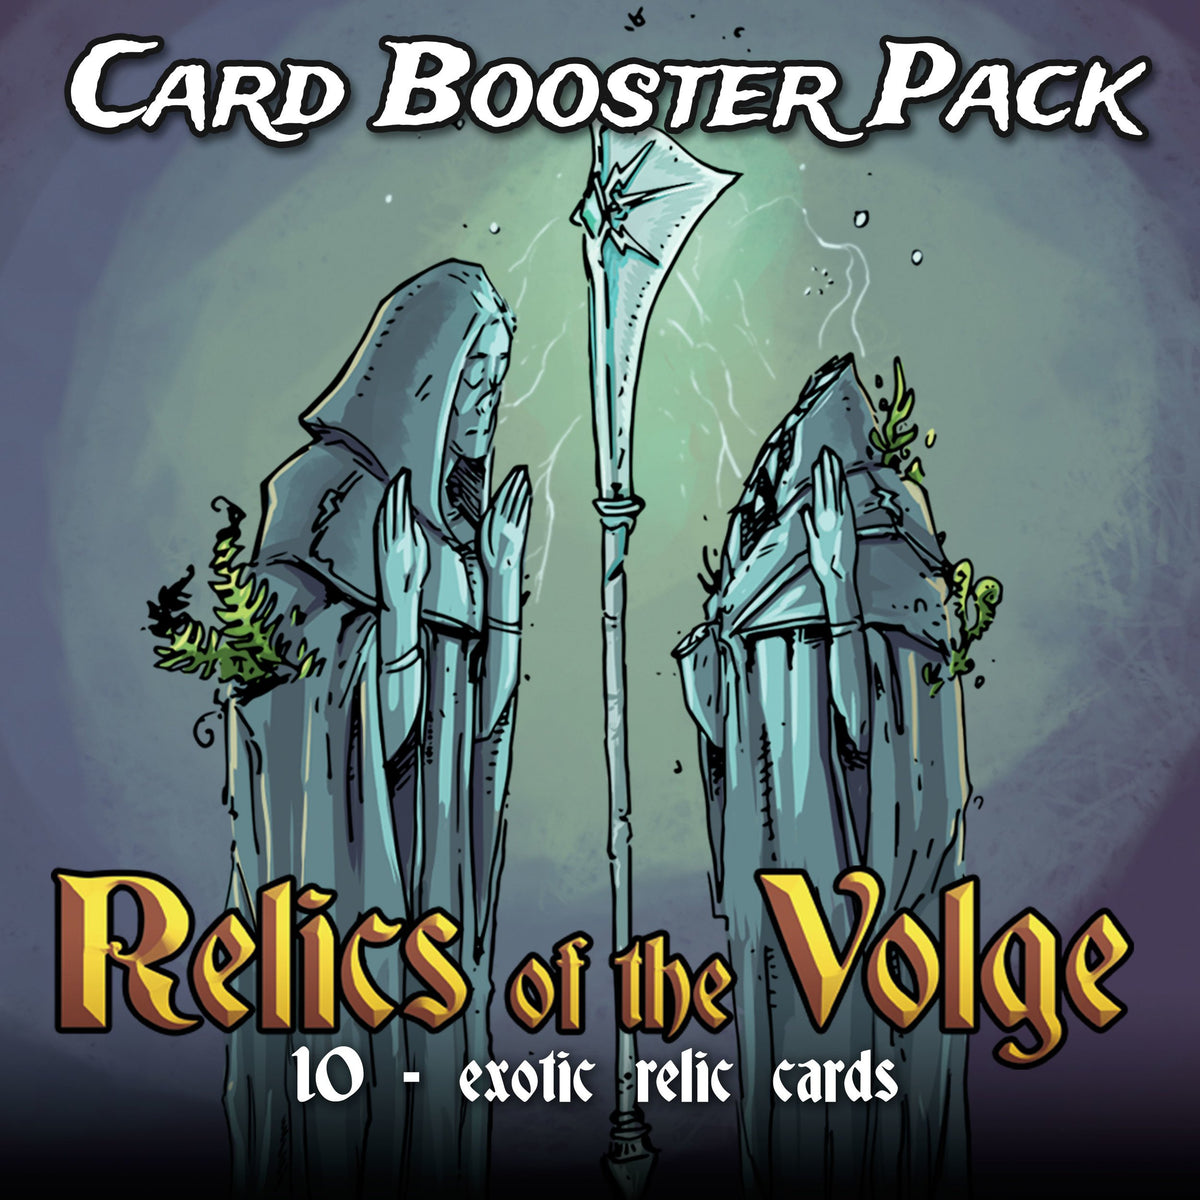 Relics of the Volge Card Booster Pack